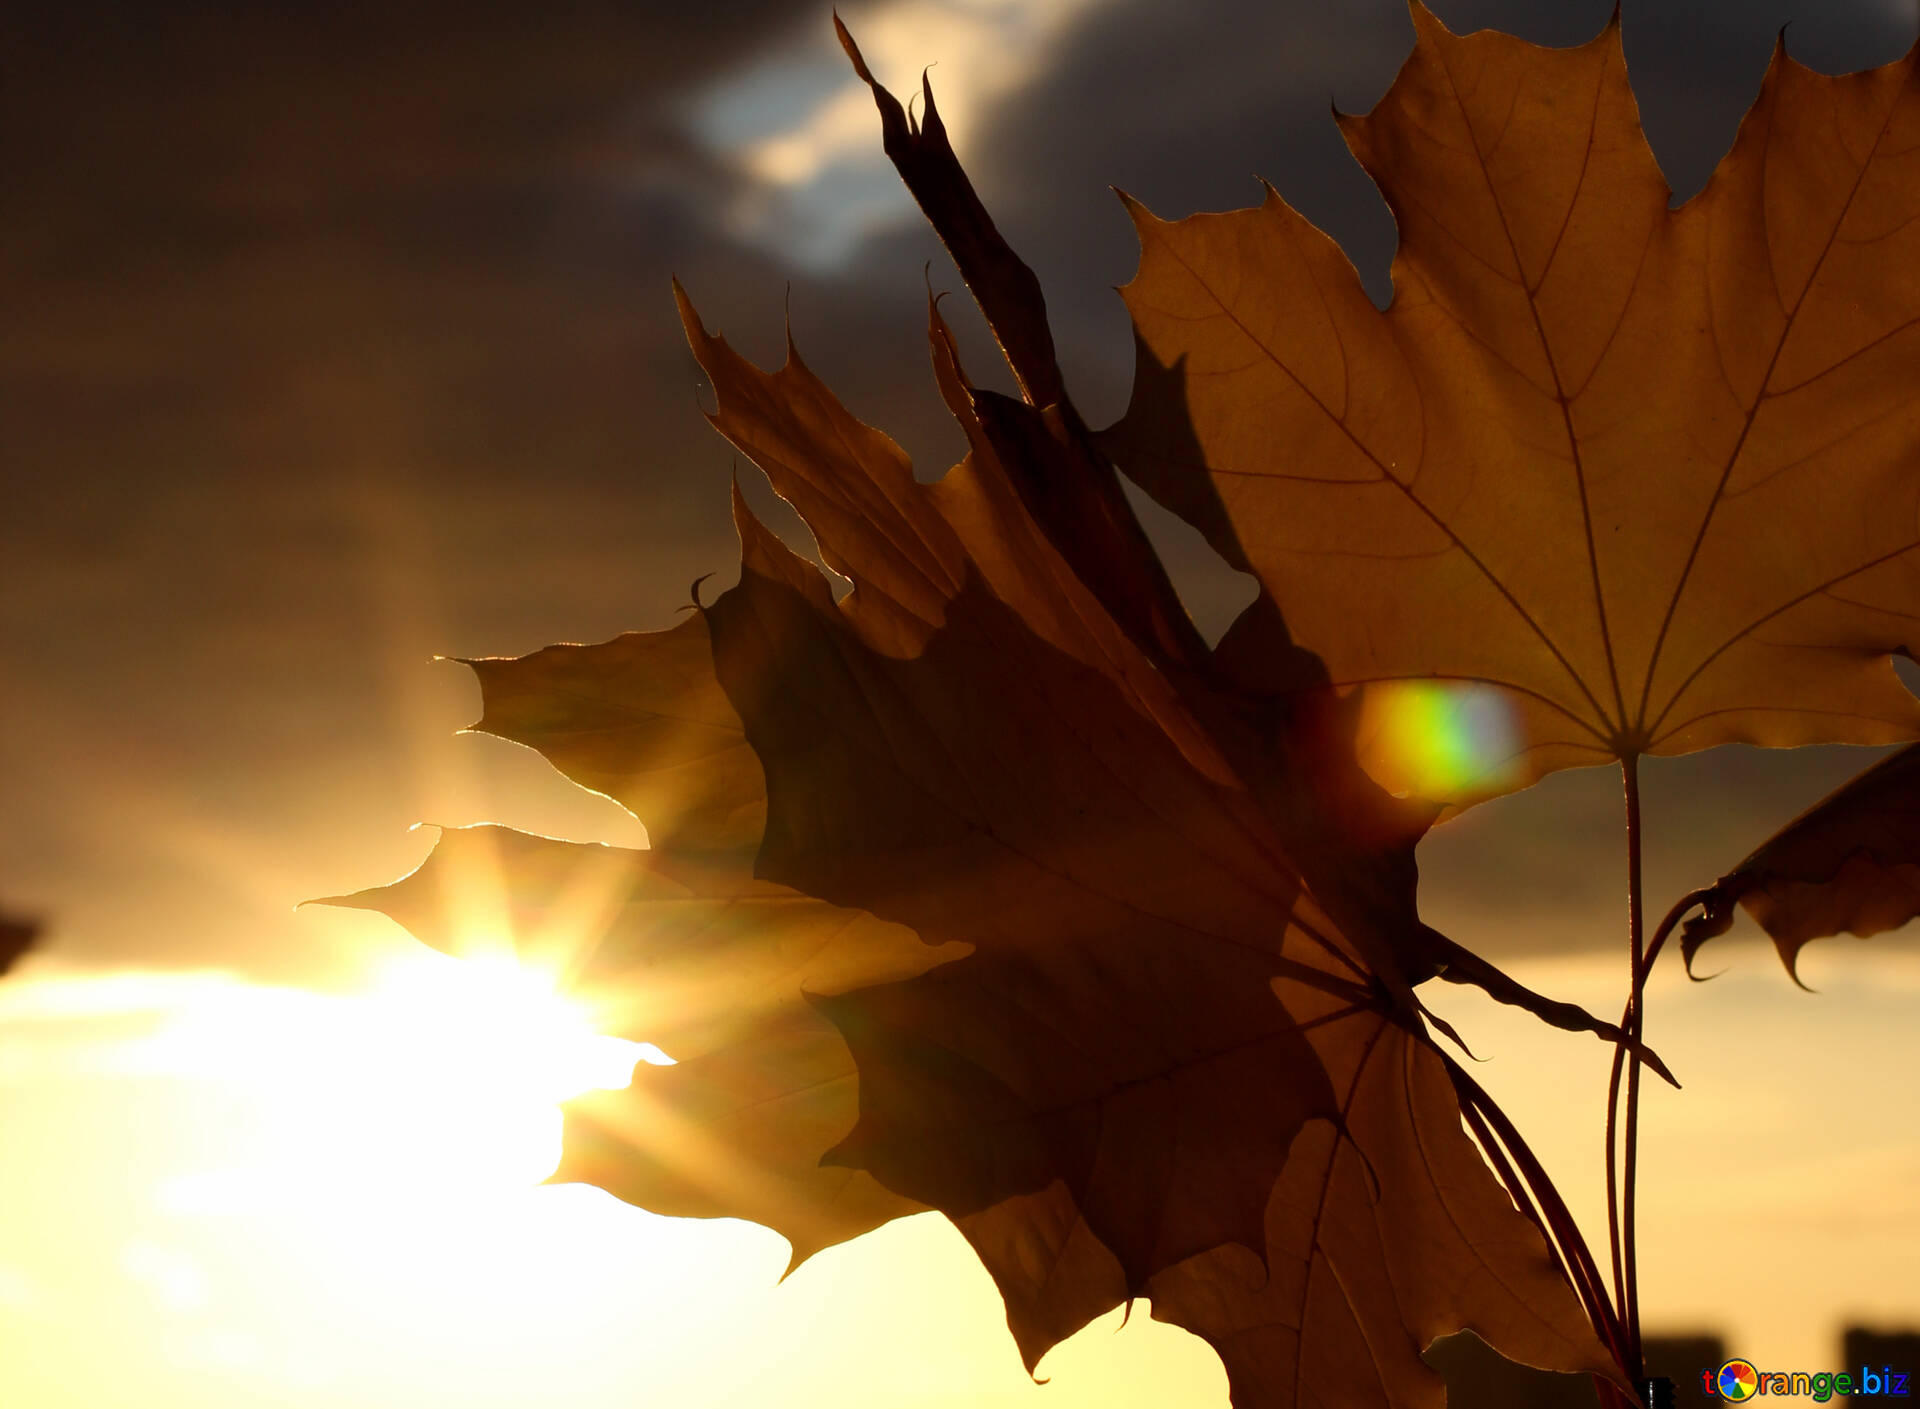 Bouquet Of Leaves Image Autumn Leaves Sunset Image Leaves № 40888. Torange.biz Free Pics On Cc By License